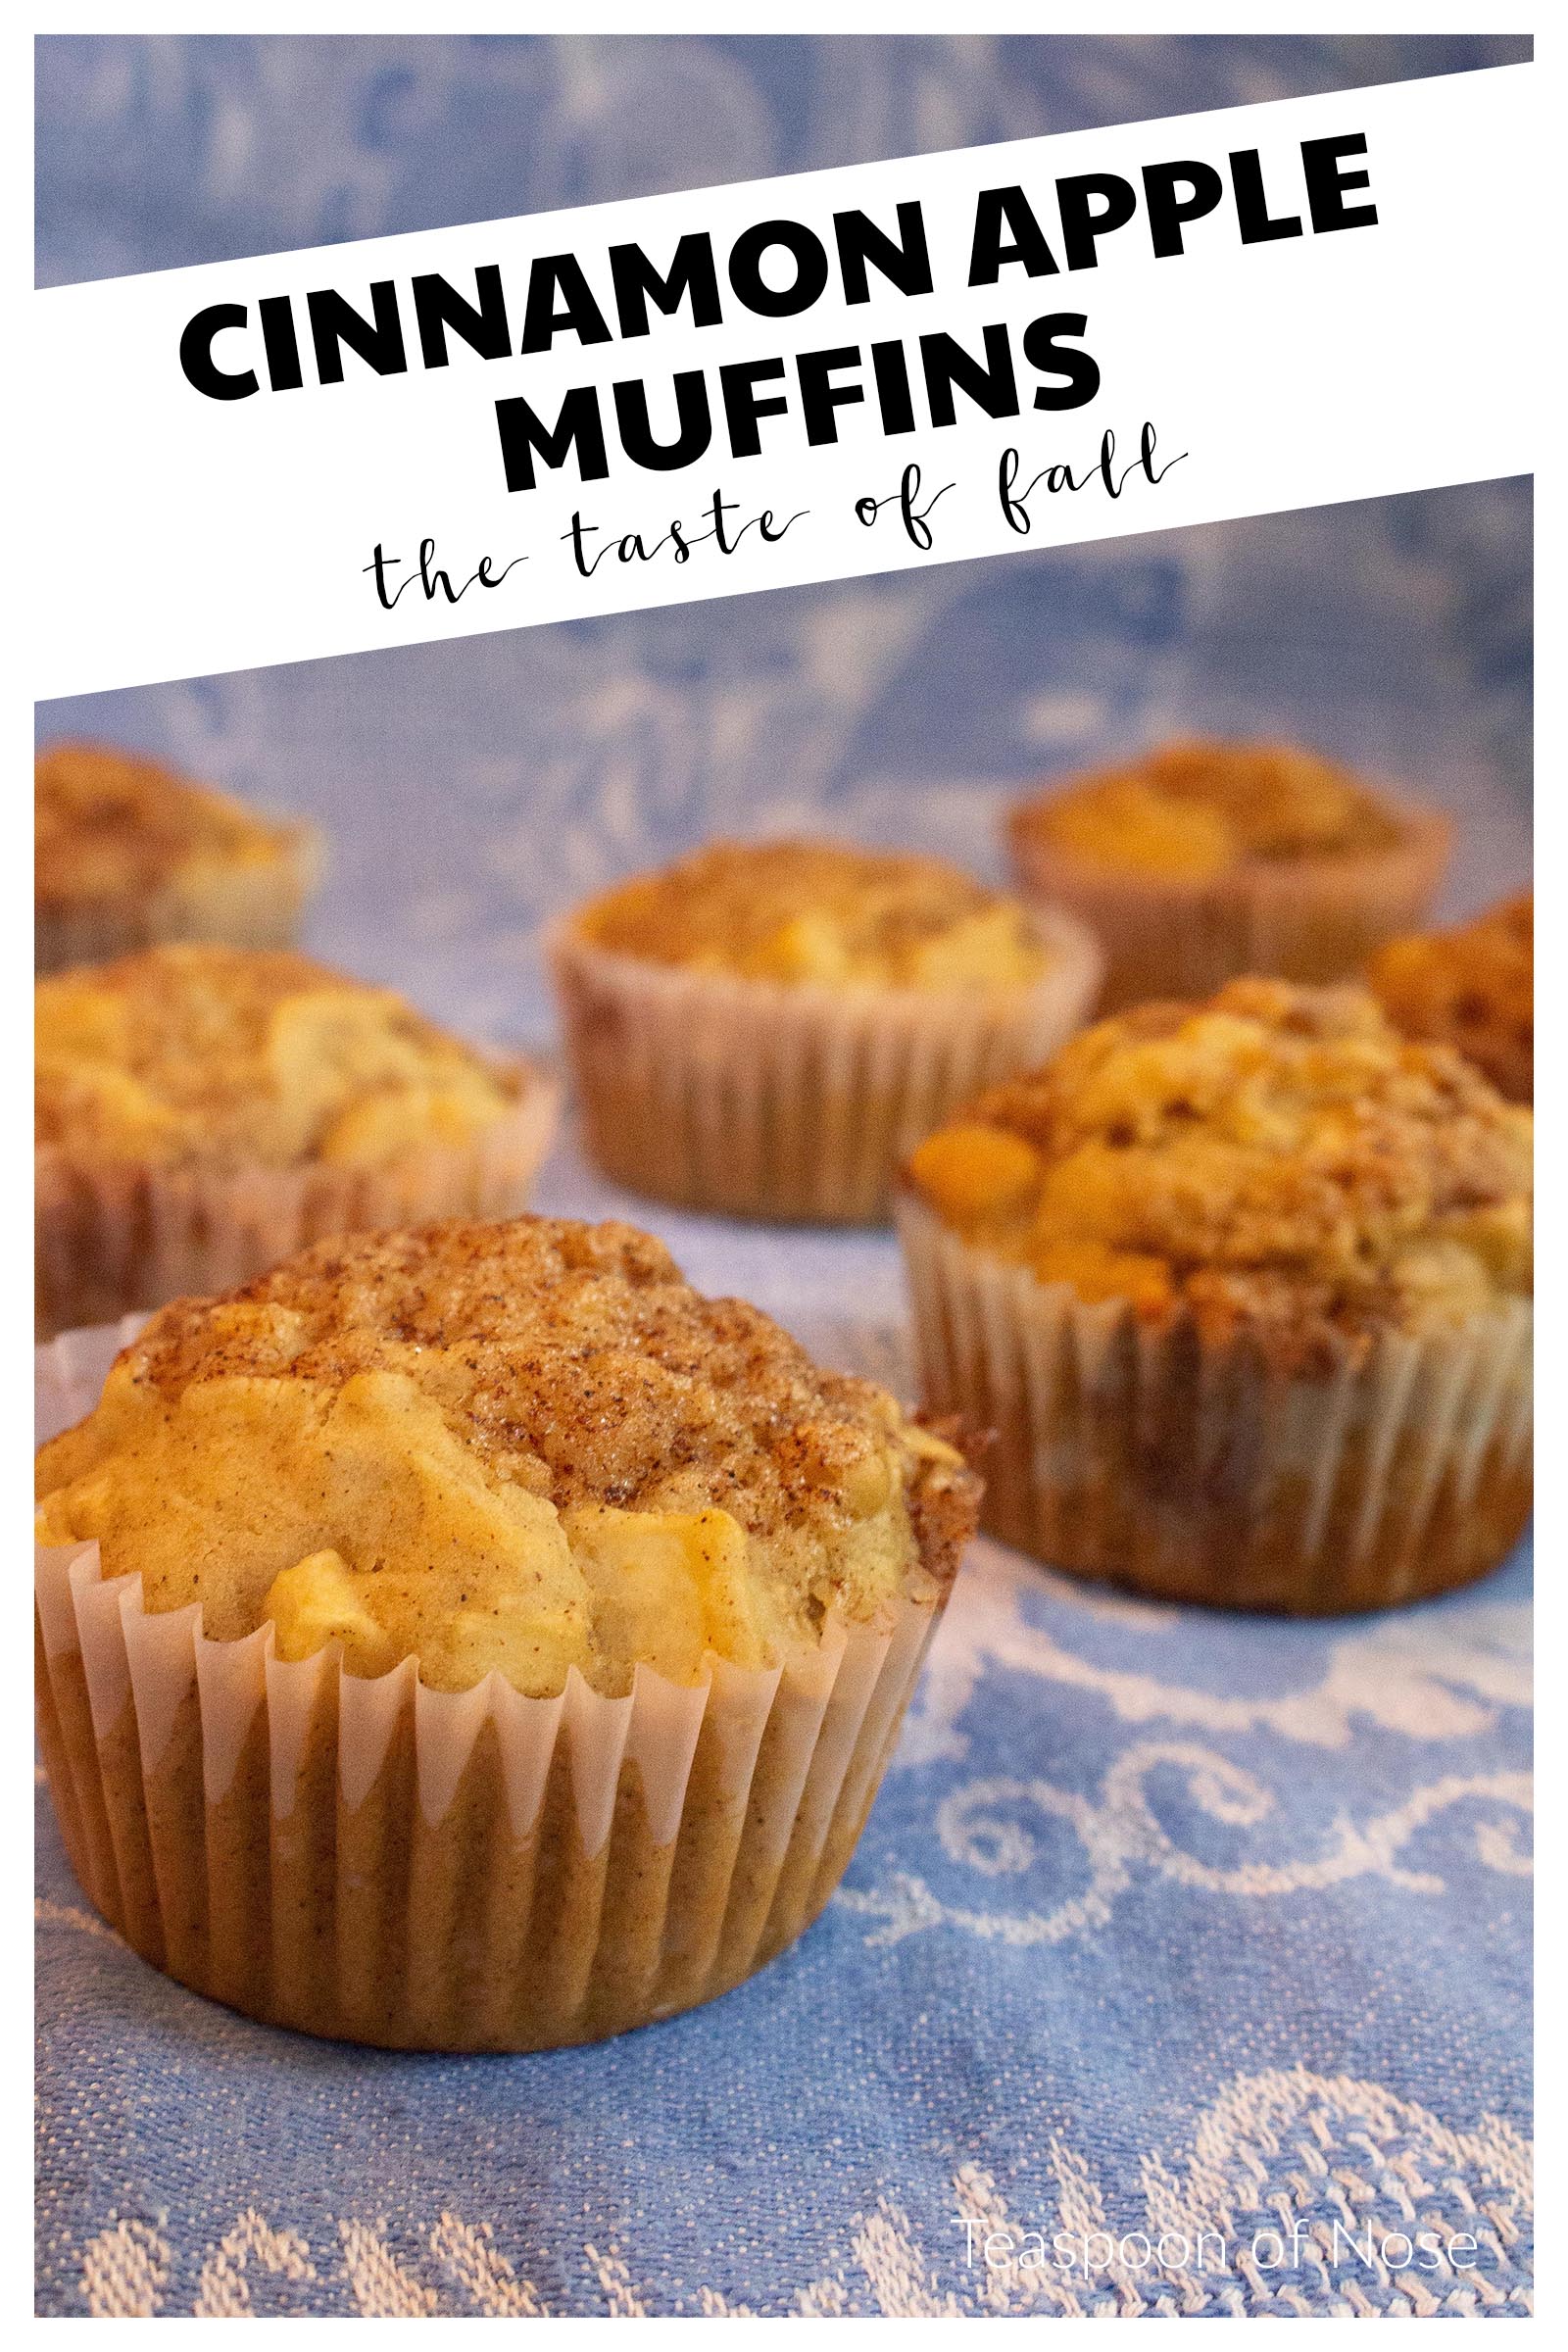 These cinnamon apple muffins make a great breakfast treat and are perfect for your next fall gathering!